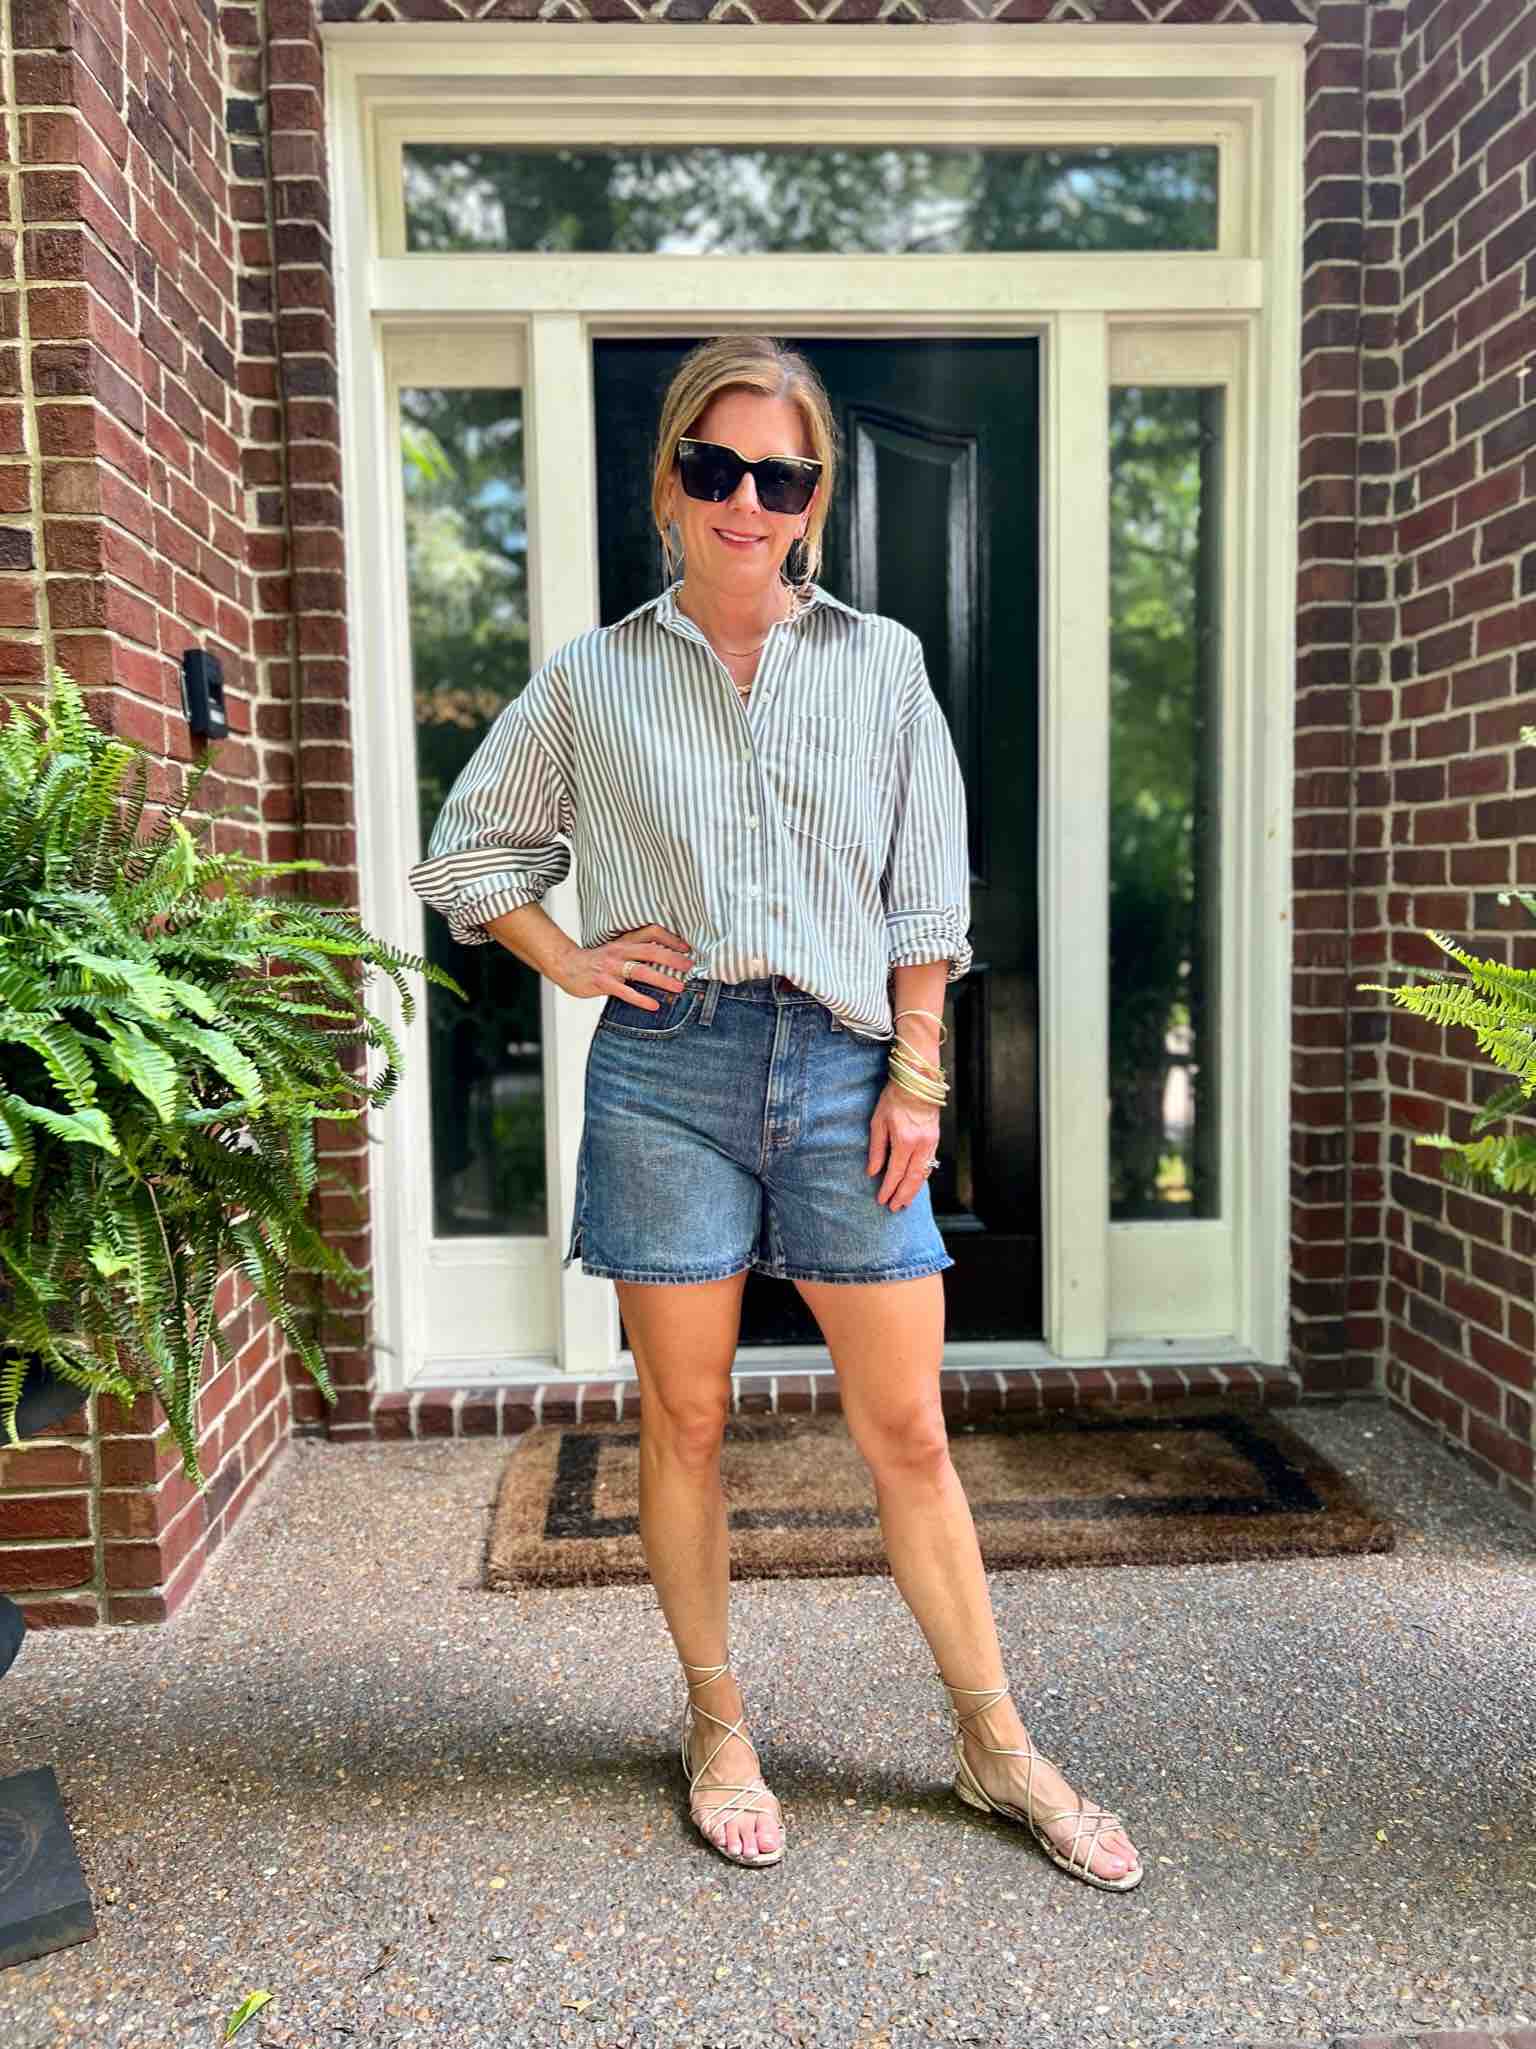 How To Dress For Fall When It's Still Hot Striped Button-Up Shirt & Jean Shorts how to wear cutoffs in your 40s the best denim shorts how to style longer jean shorts Nashville stylists share fun fall looks how to wear a blouse with jean shorts